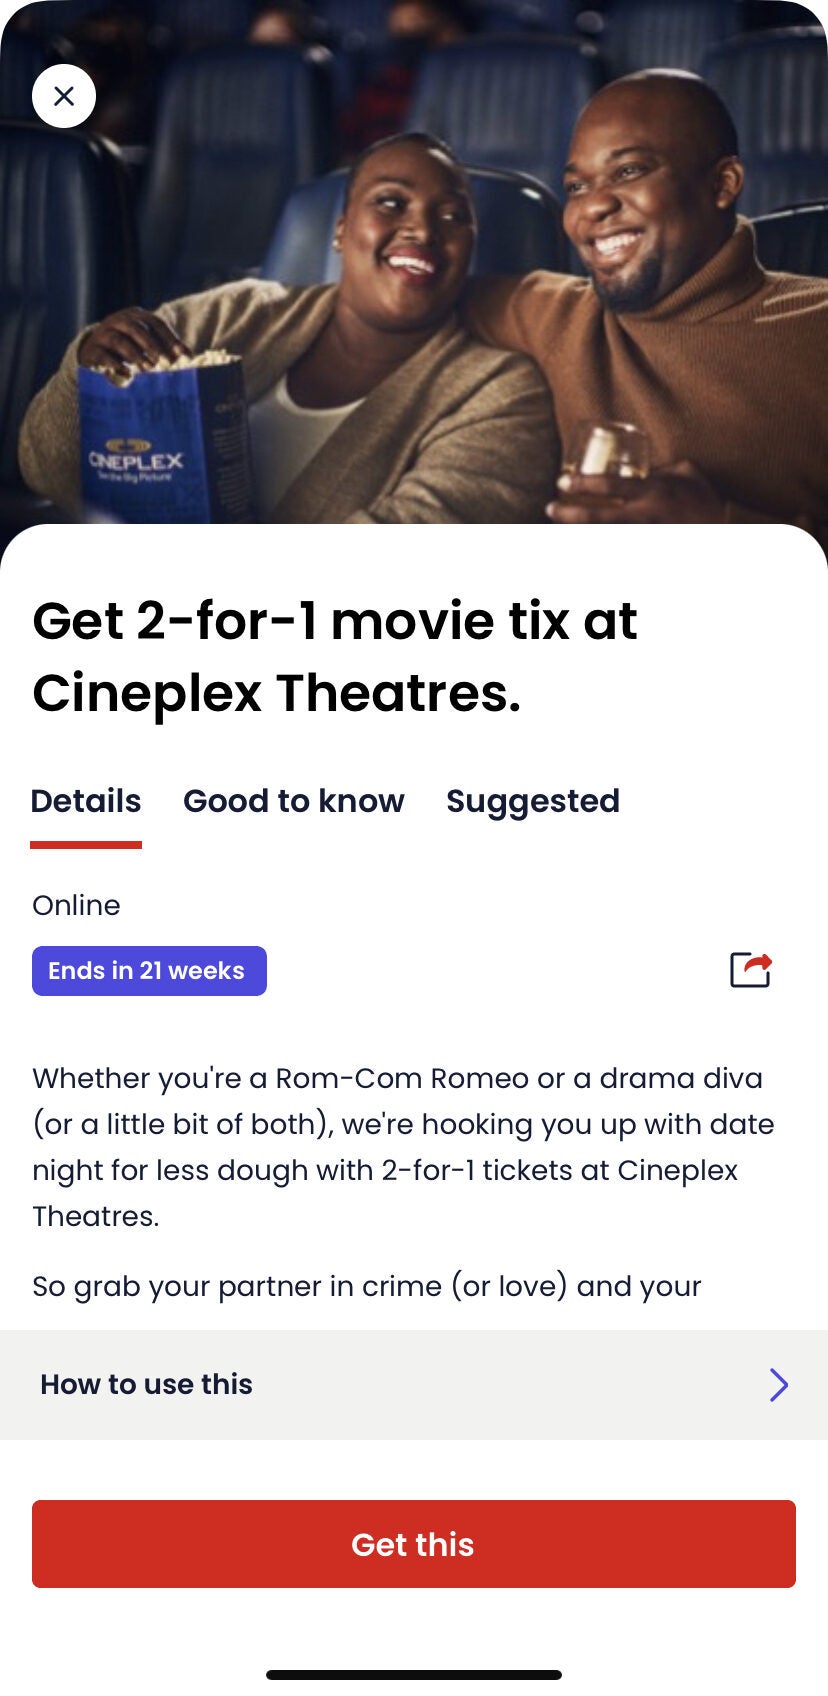 The Rec Room] Free Cineplex Movie Ticket w/ purchase of $40+ The Rec Room  e-Gift Card (also redeemable at Cineplex) - RedFlagDeals.com Forums